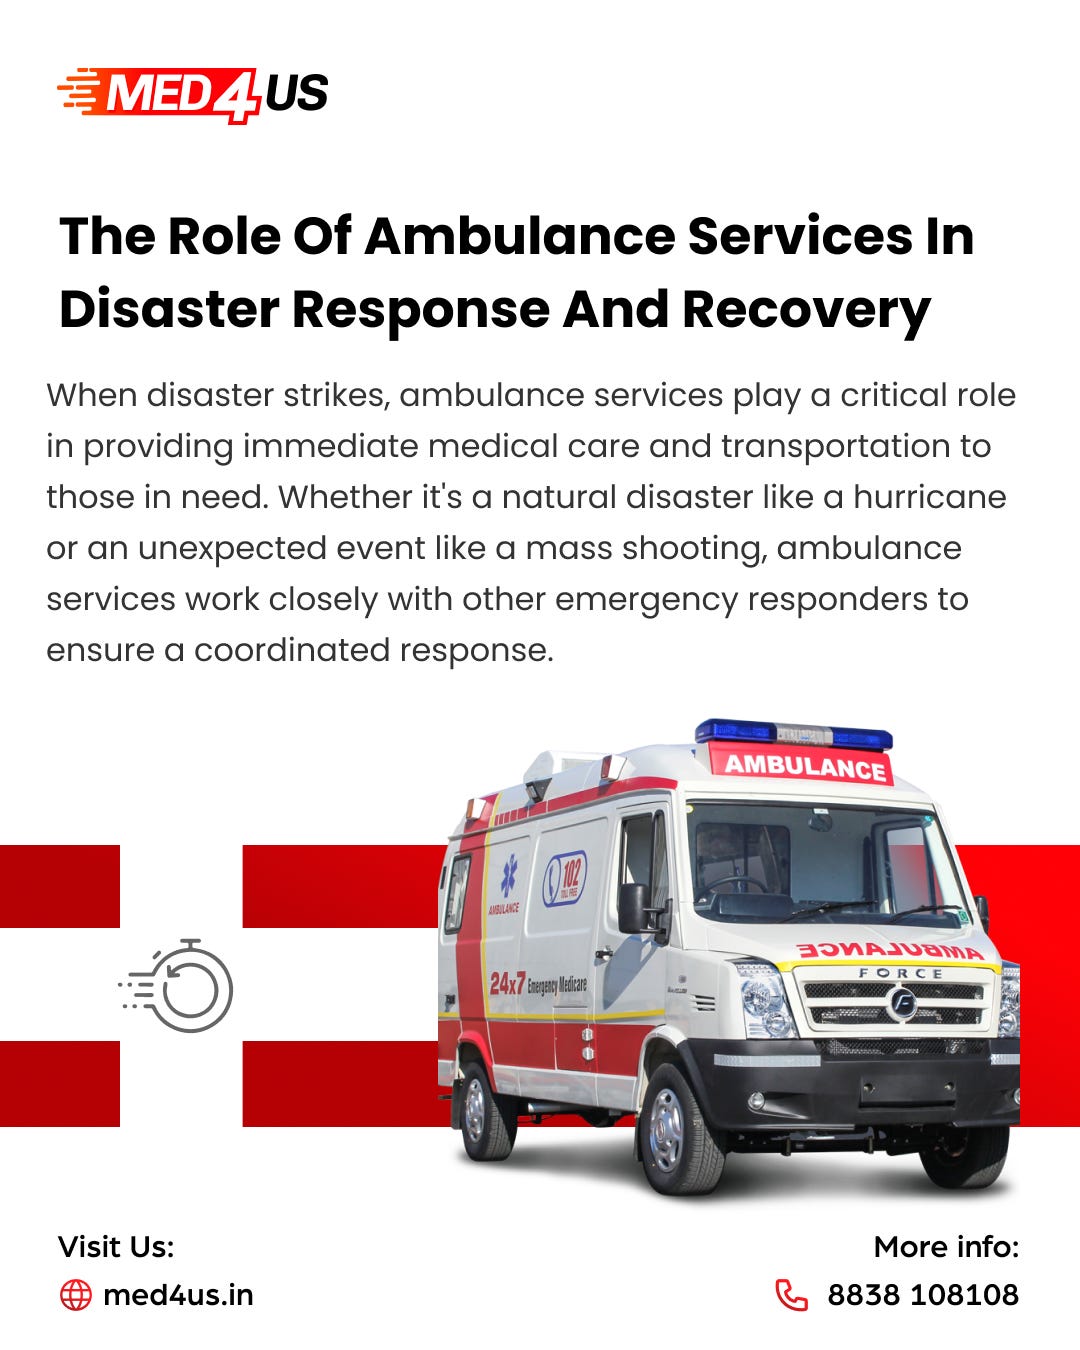 The Role of Ambulance Services in Disaster Response and Recovery, by  Med4us